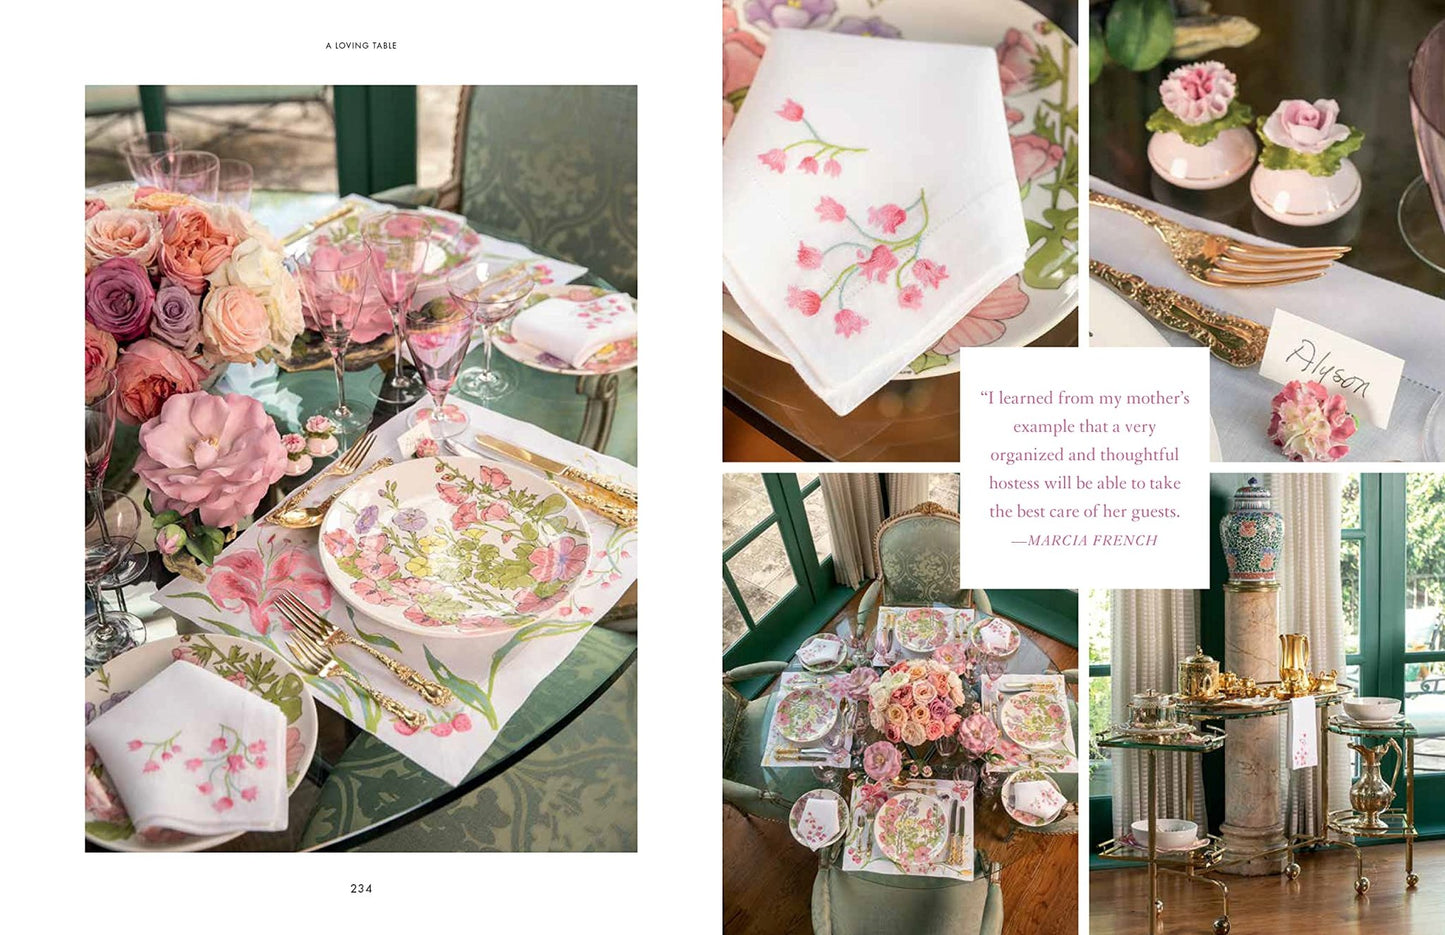 A Loving Table: Creating Memorable Gatherings - HOUSE OF SHE